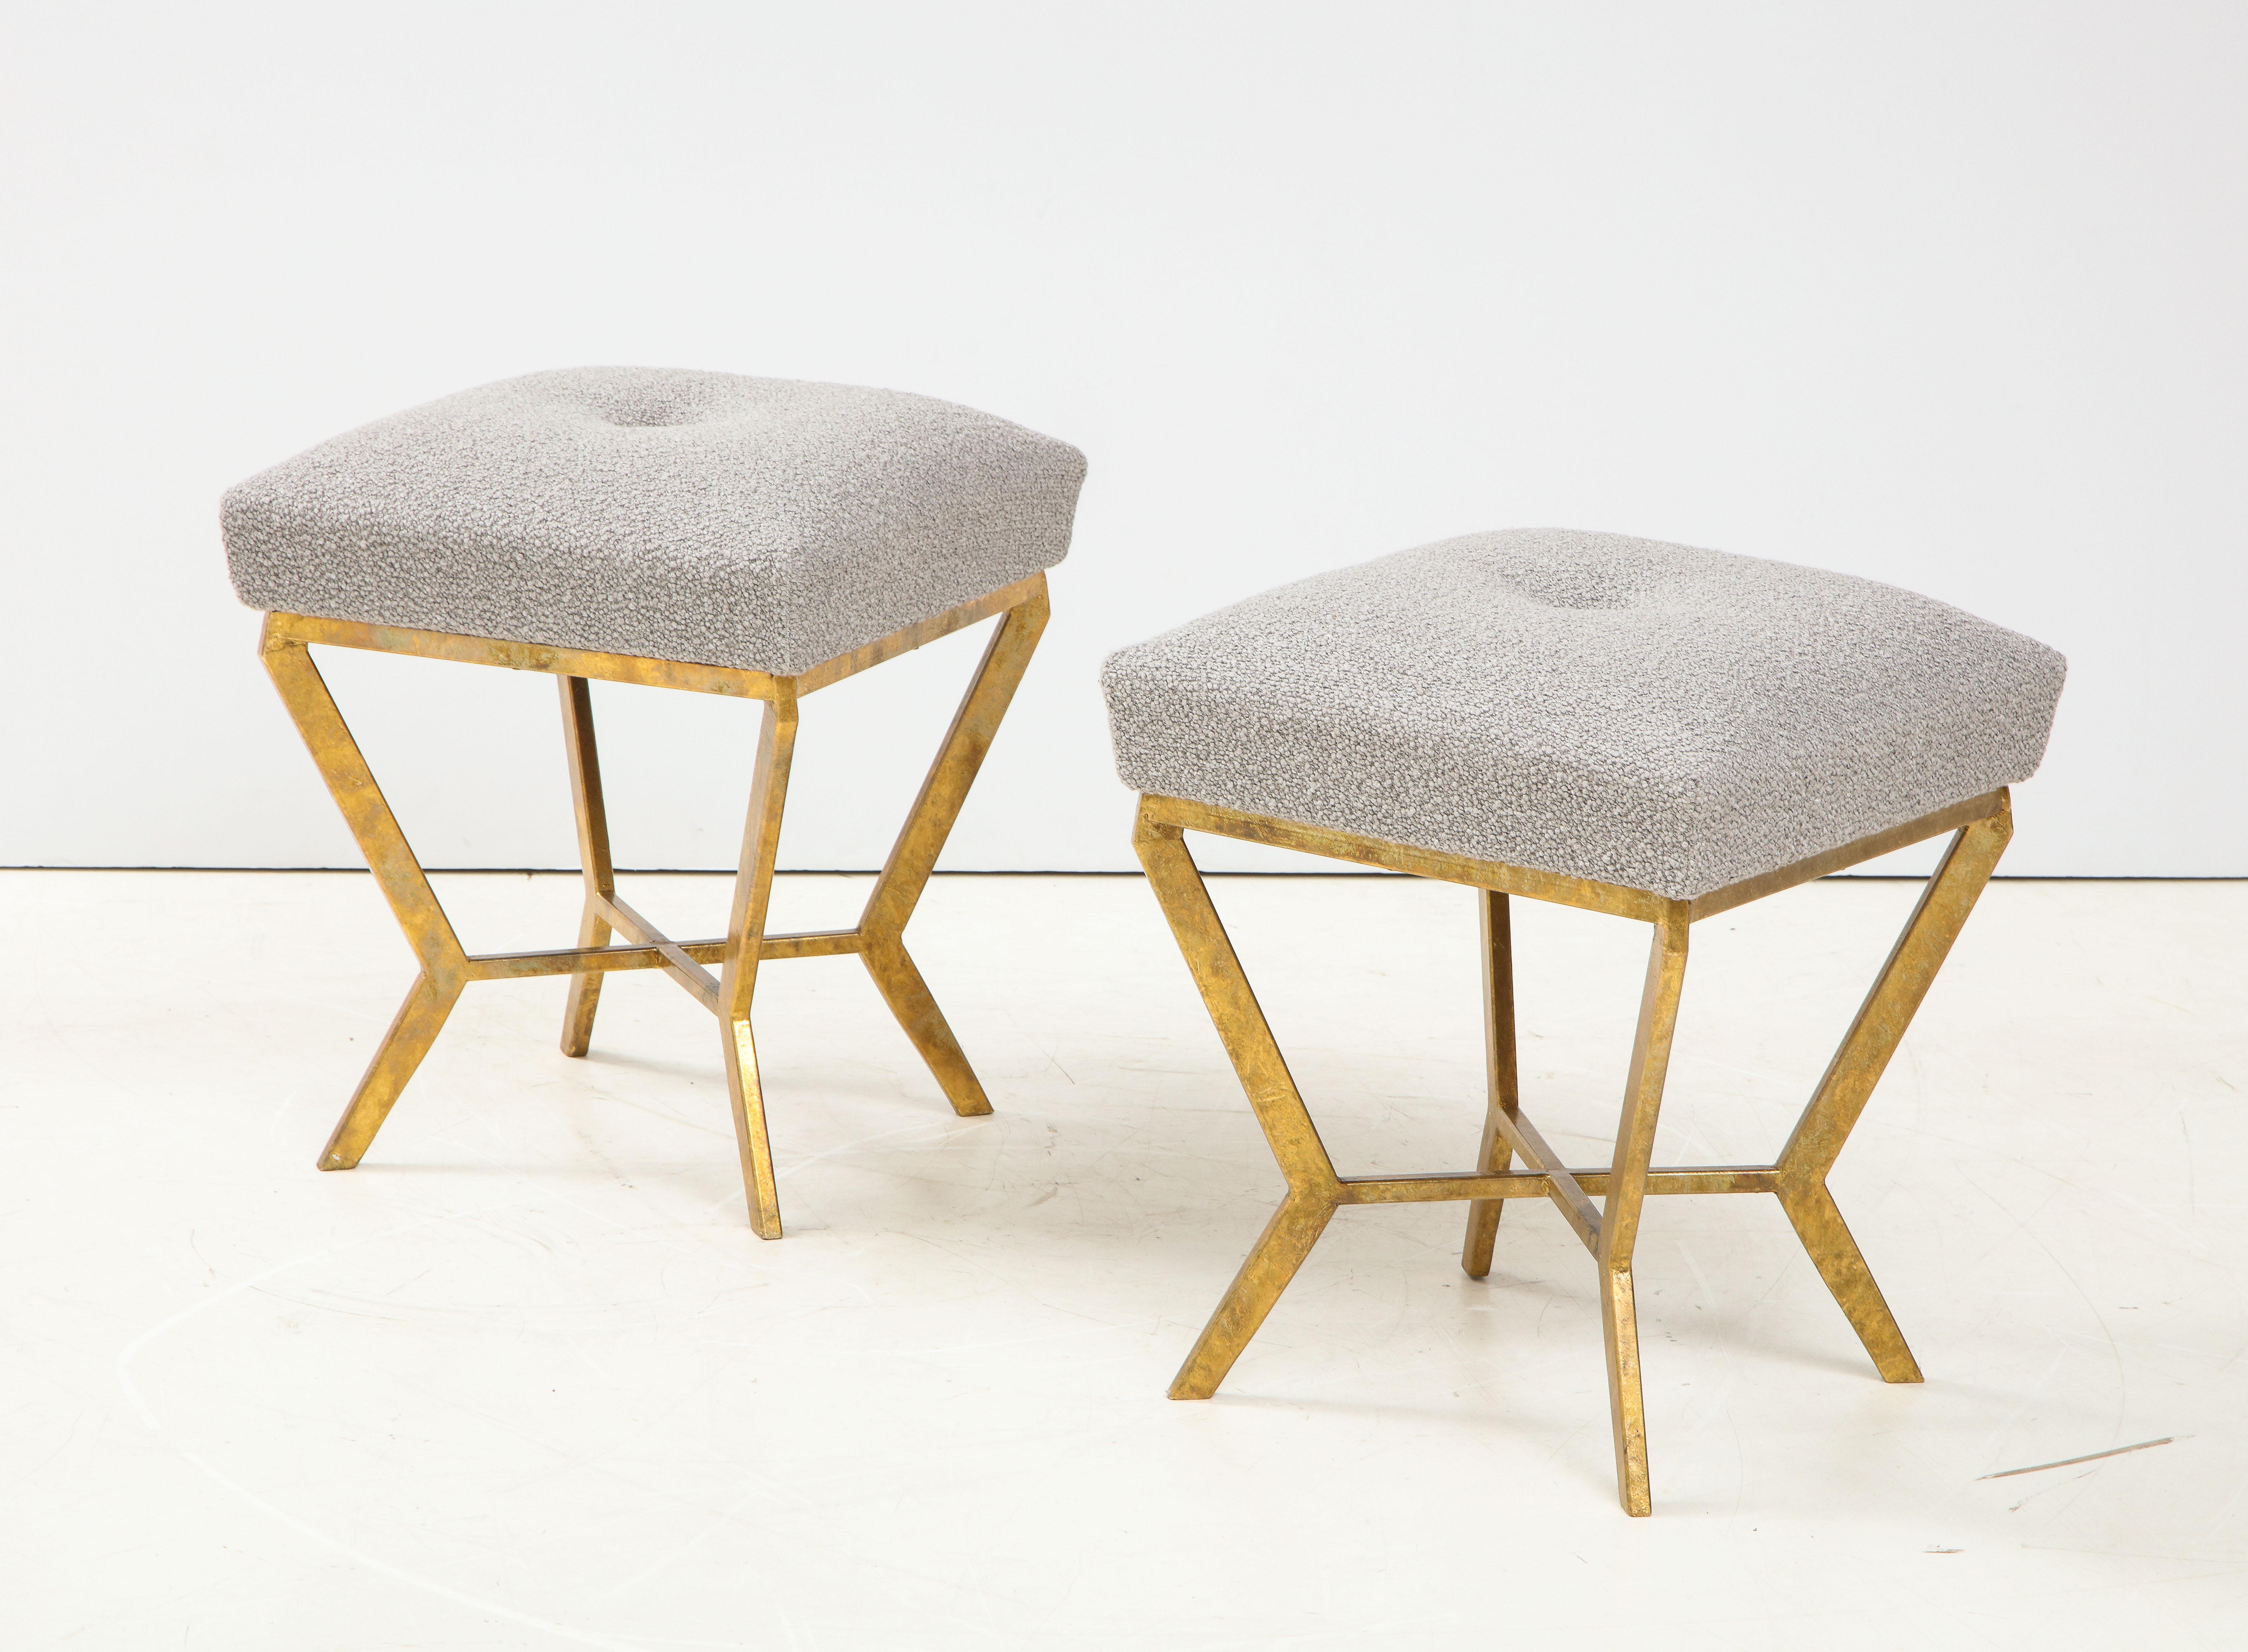 Contemporary Pair of Gilded Gold Leaf Iron Stools with Tufted Grey Boucle, Italy, 2021